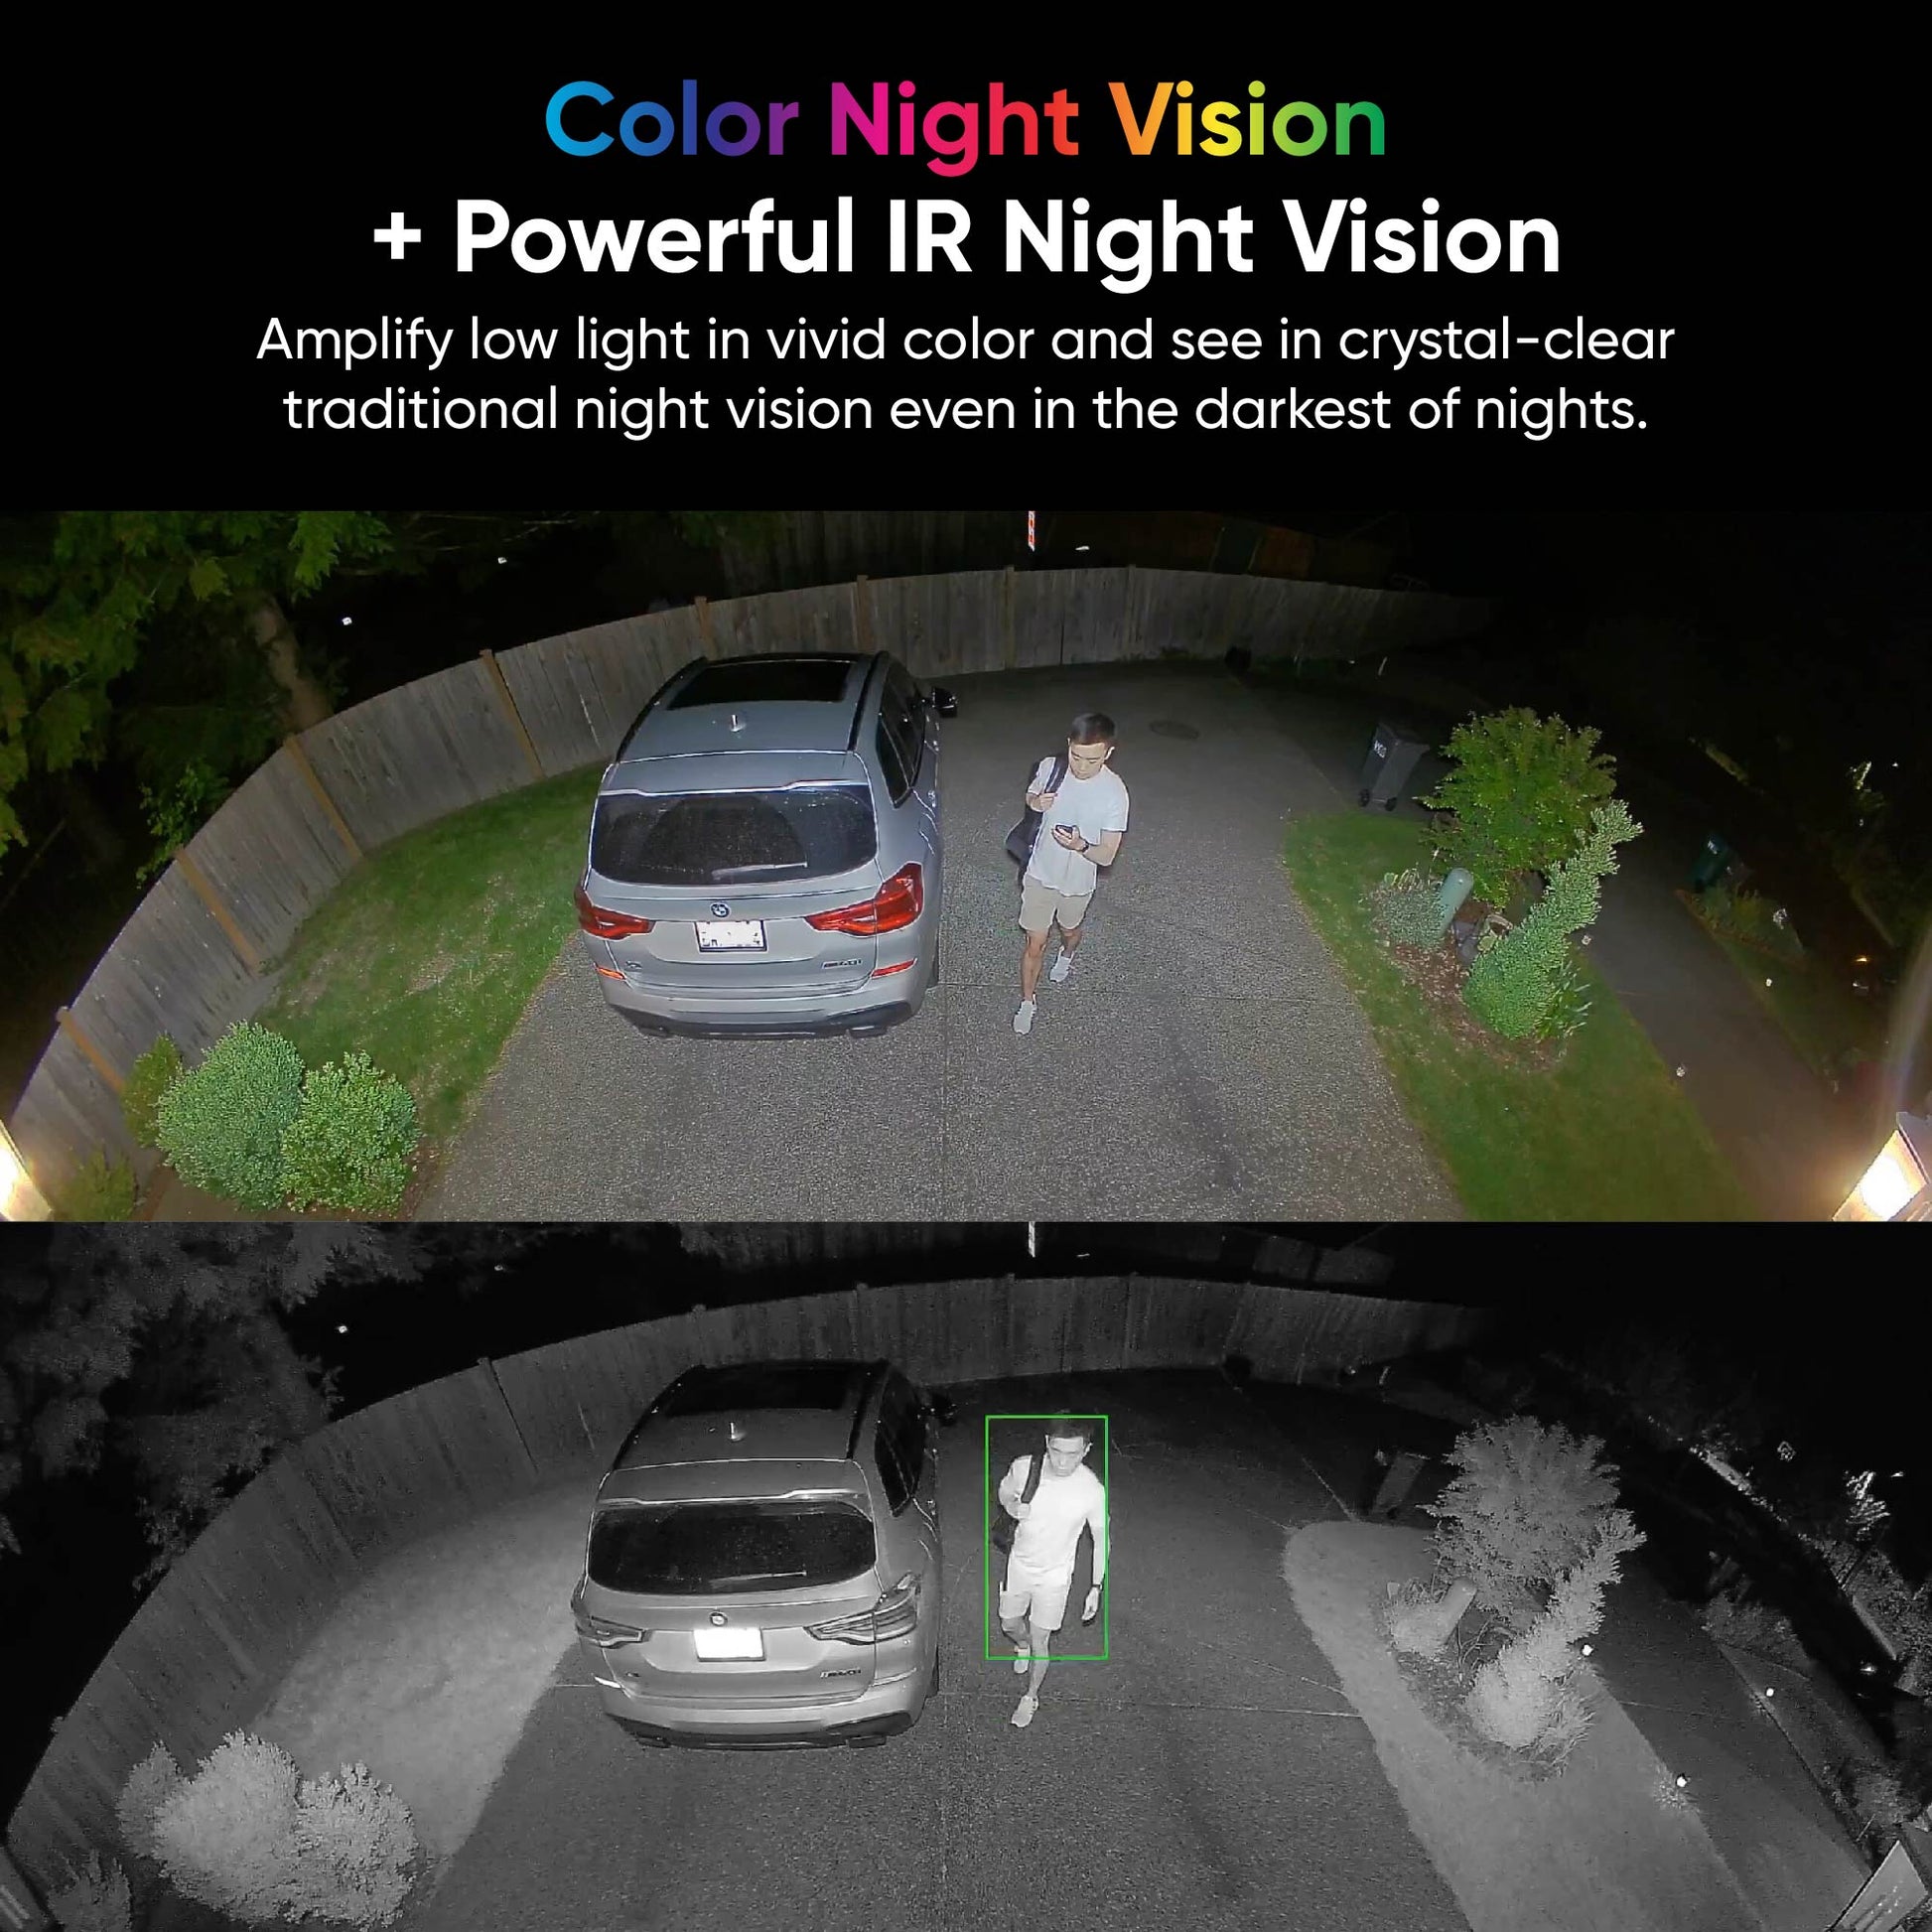 Side-by-side picture comparison of Color Night Vision vs Powerful IR Night Vision.